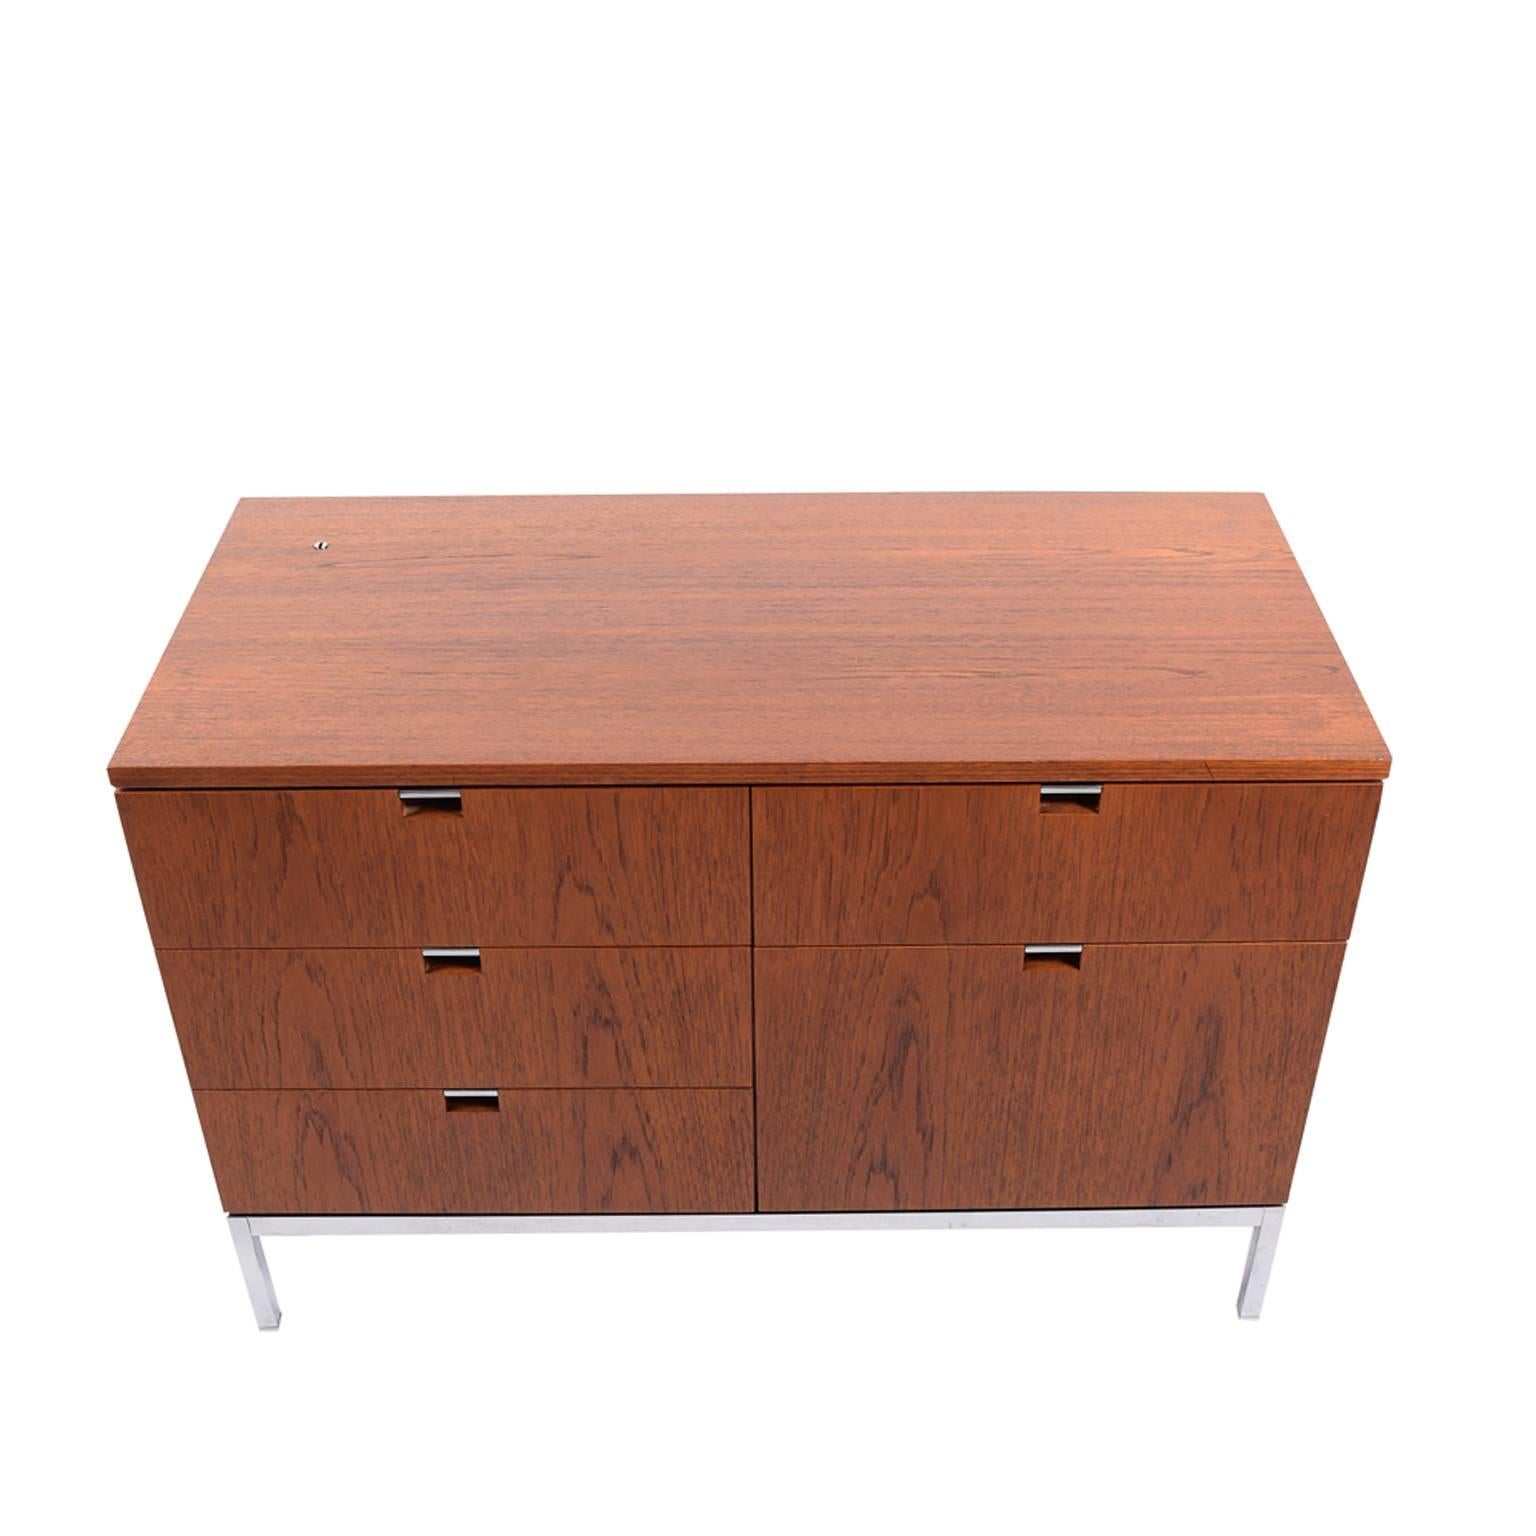 Iconic Florence Knoll design from the executive line, this teak five-drawer chest is freestanding, raised on chrome steel base. Dated 1972. Model 2542M.